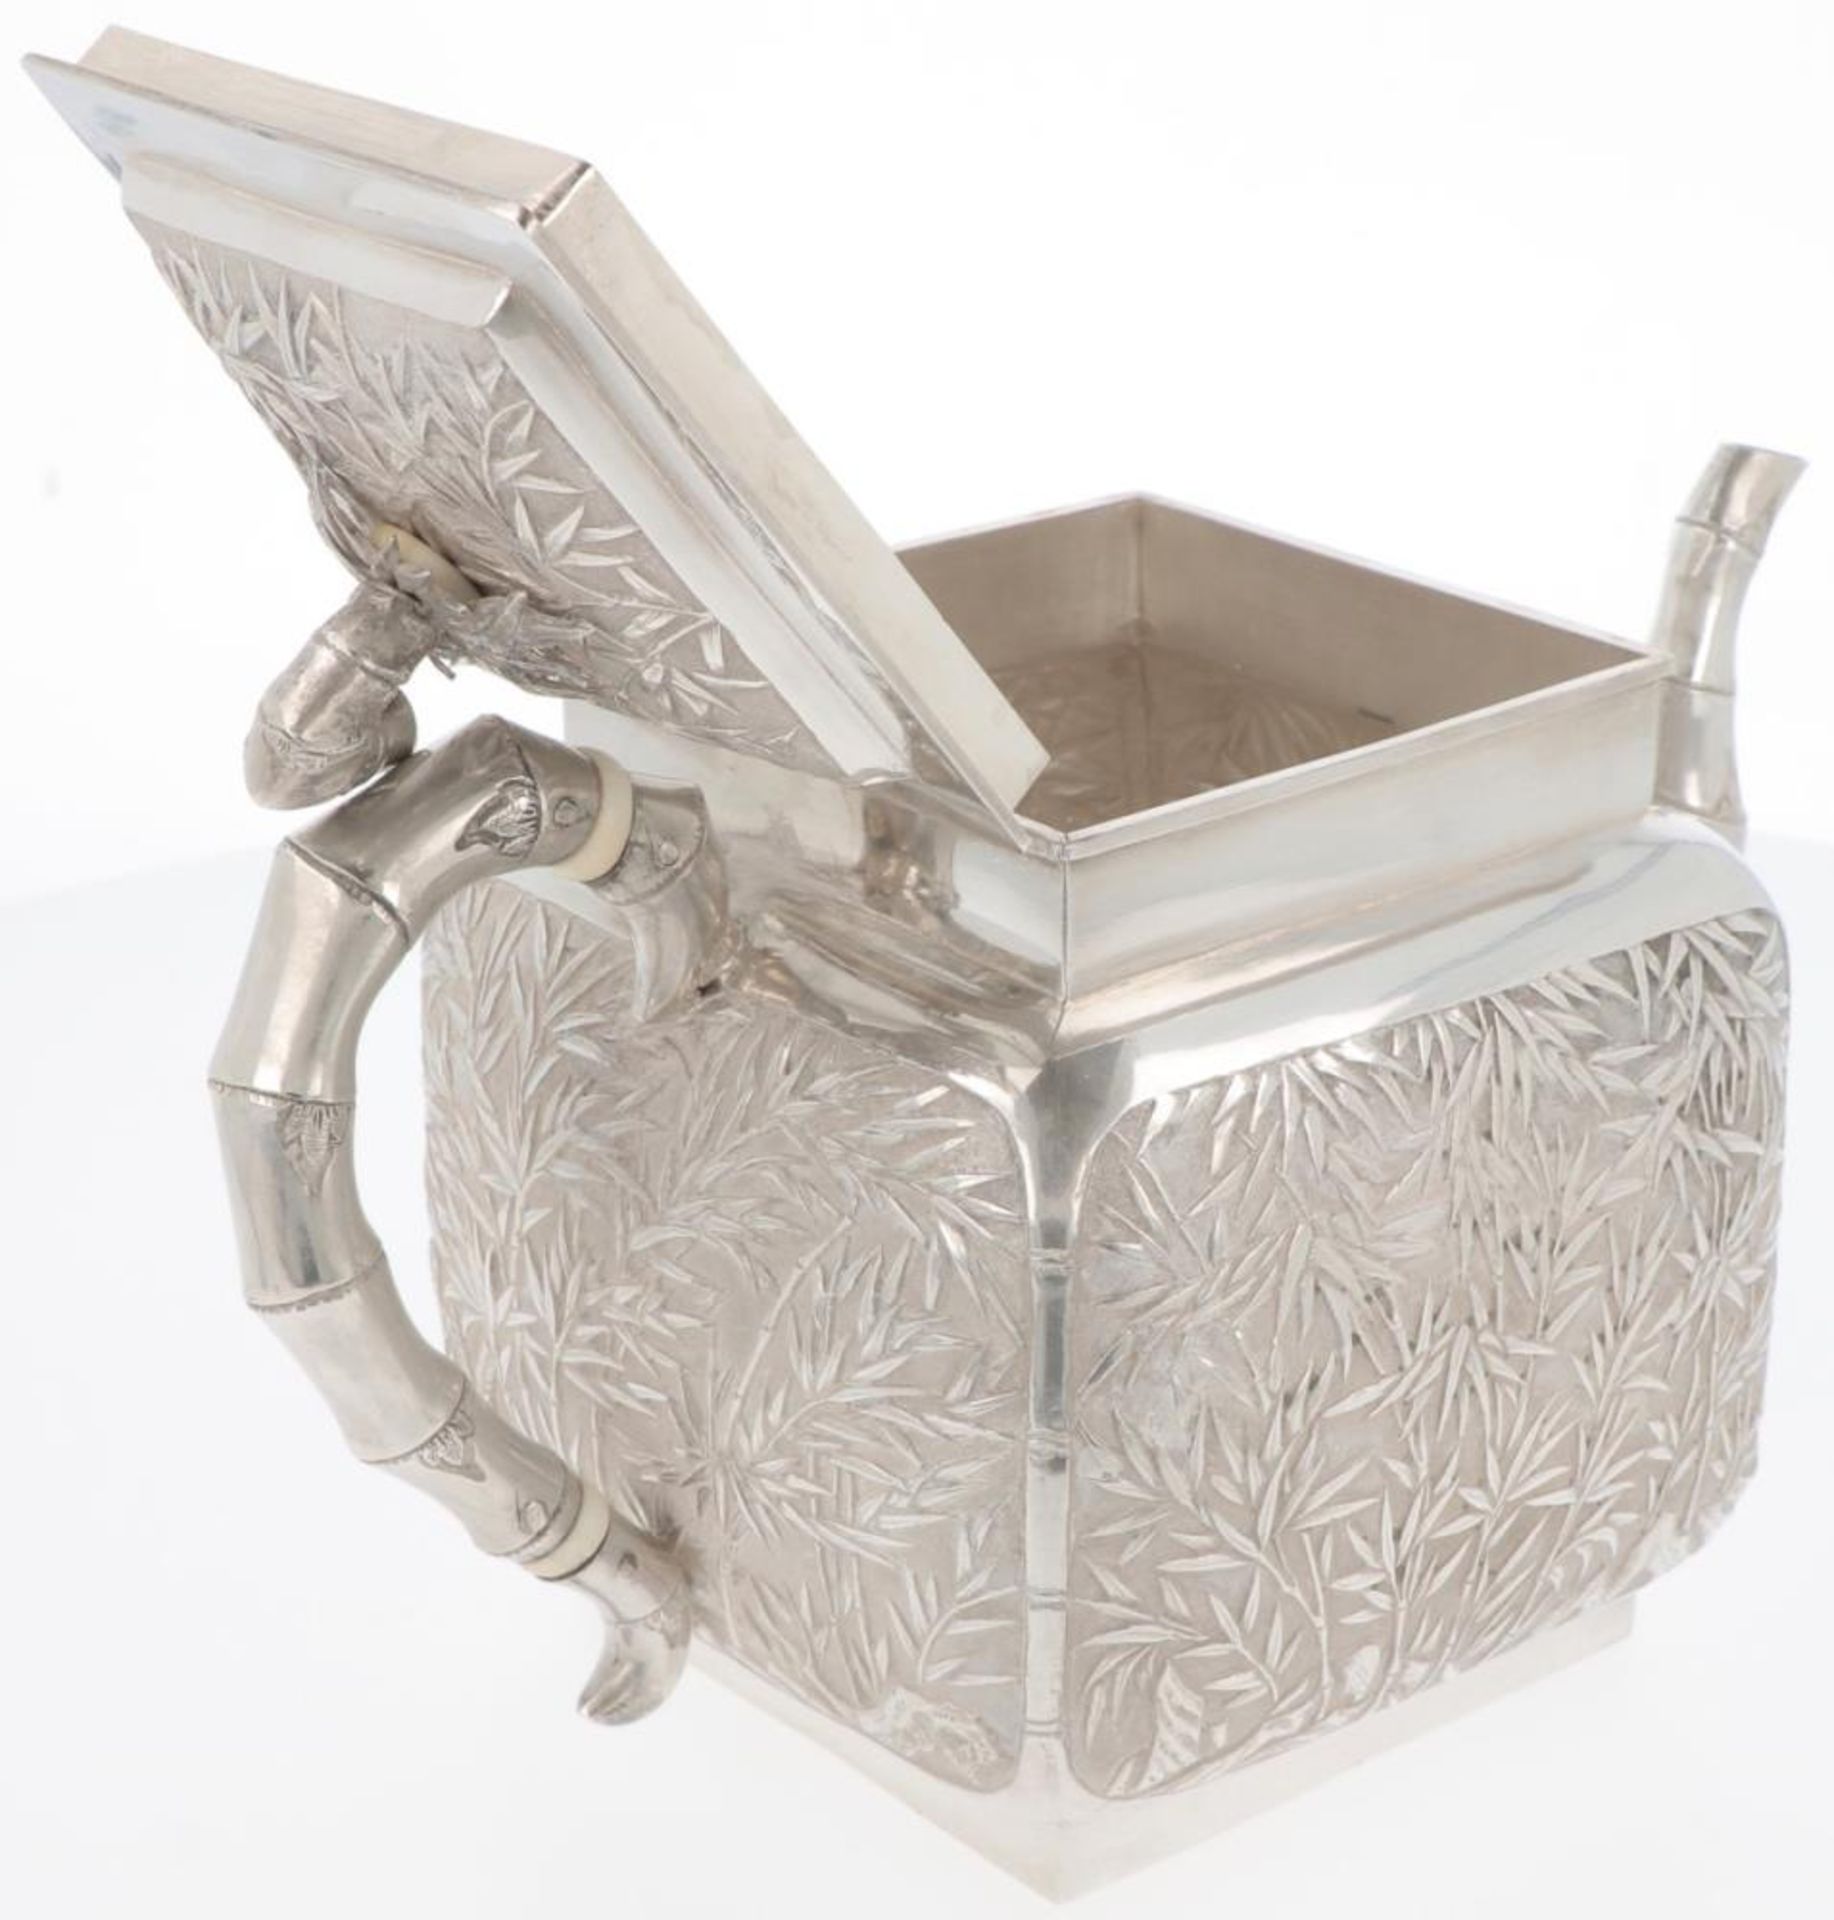 Teapot (Chinese export) silver. - Image 3 of 4